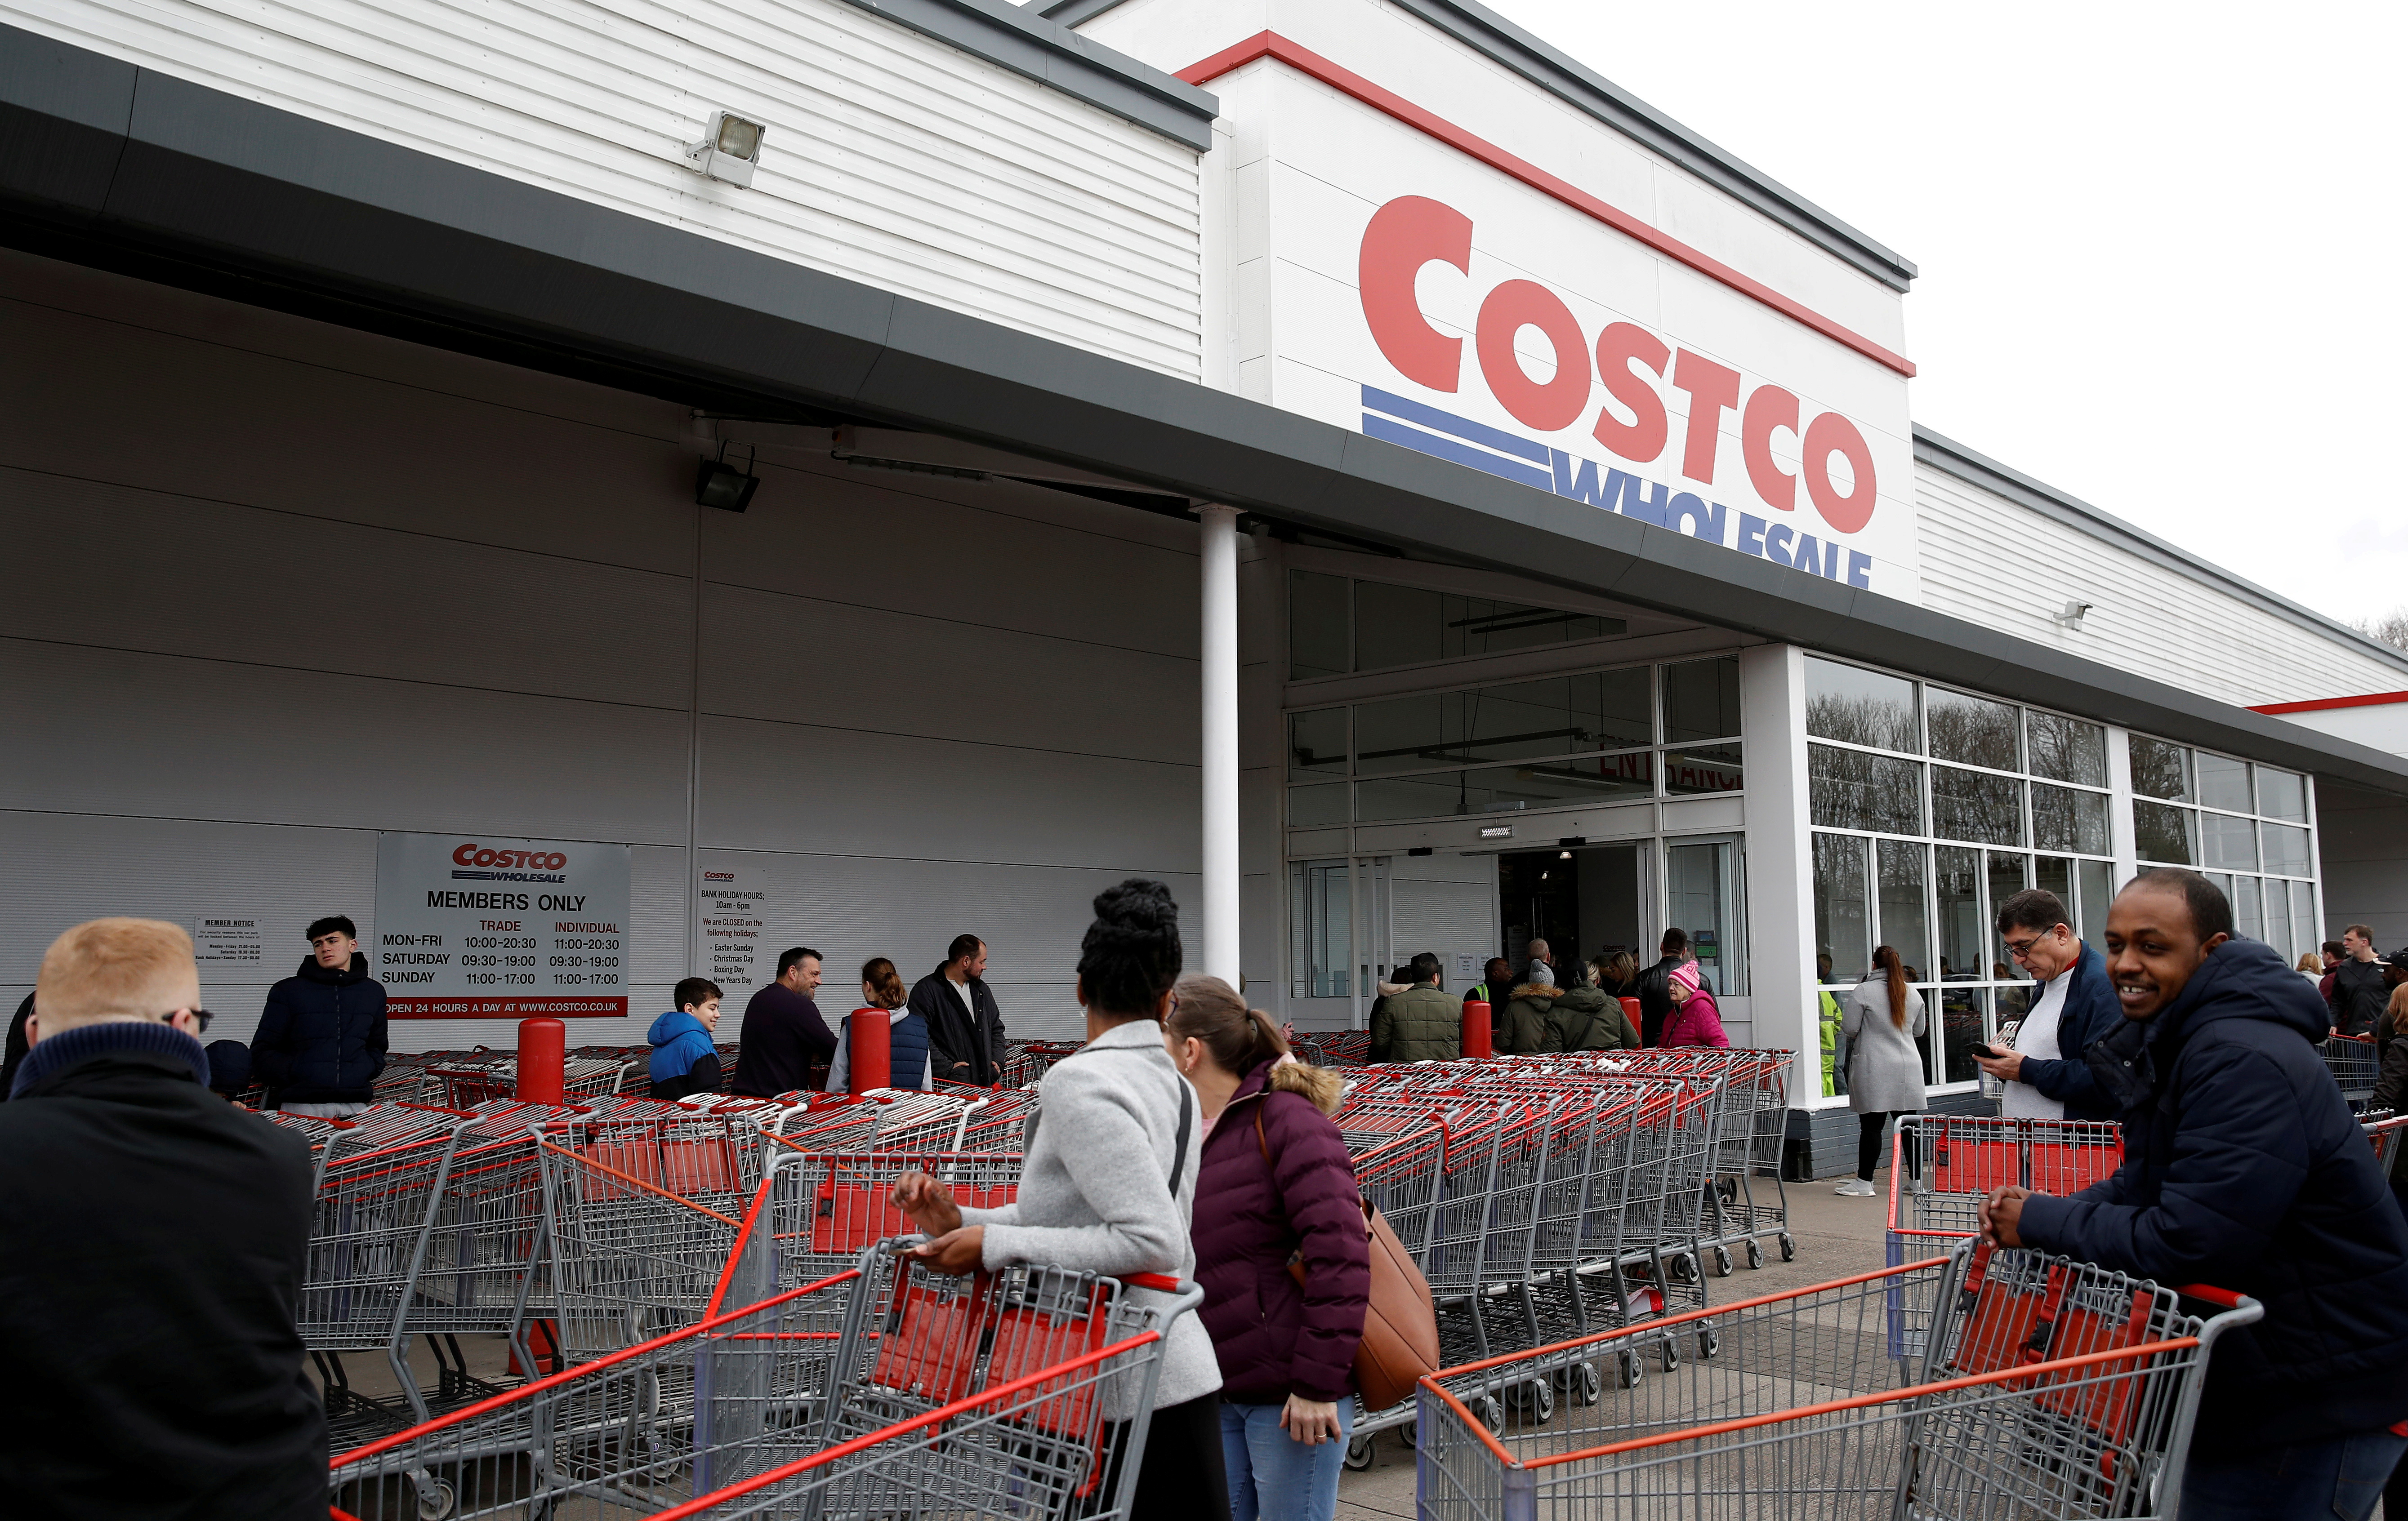 People form a long queue as they wait for the Costco Wholesale store to open in Manchester